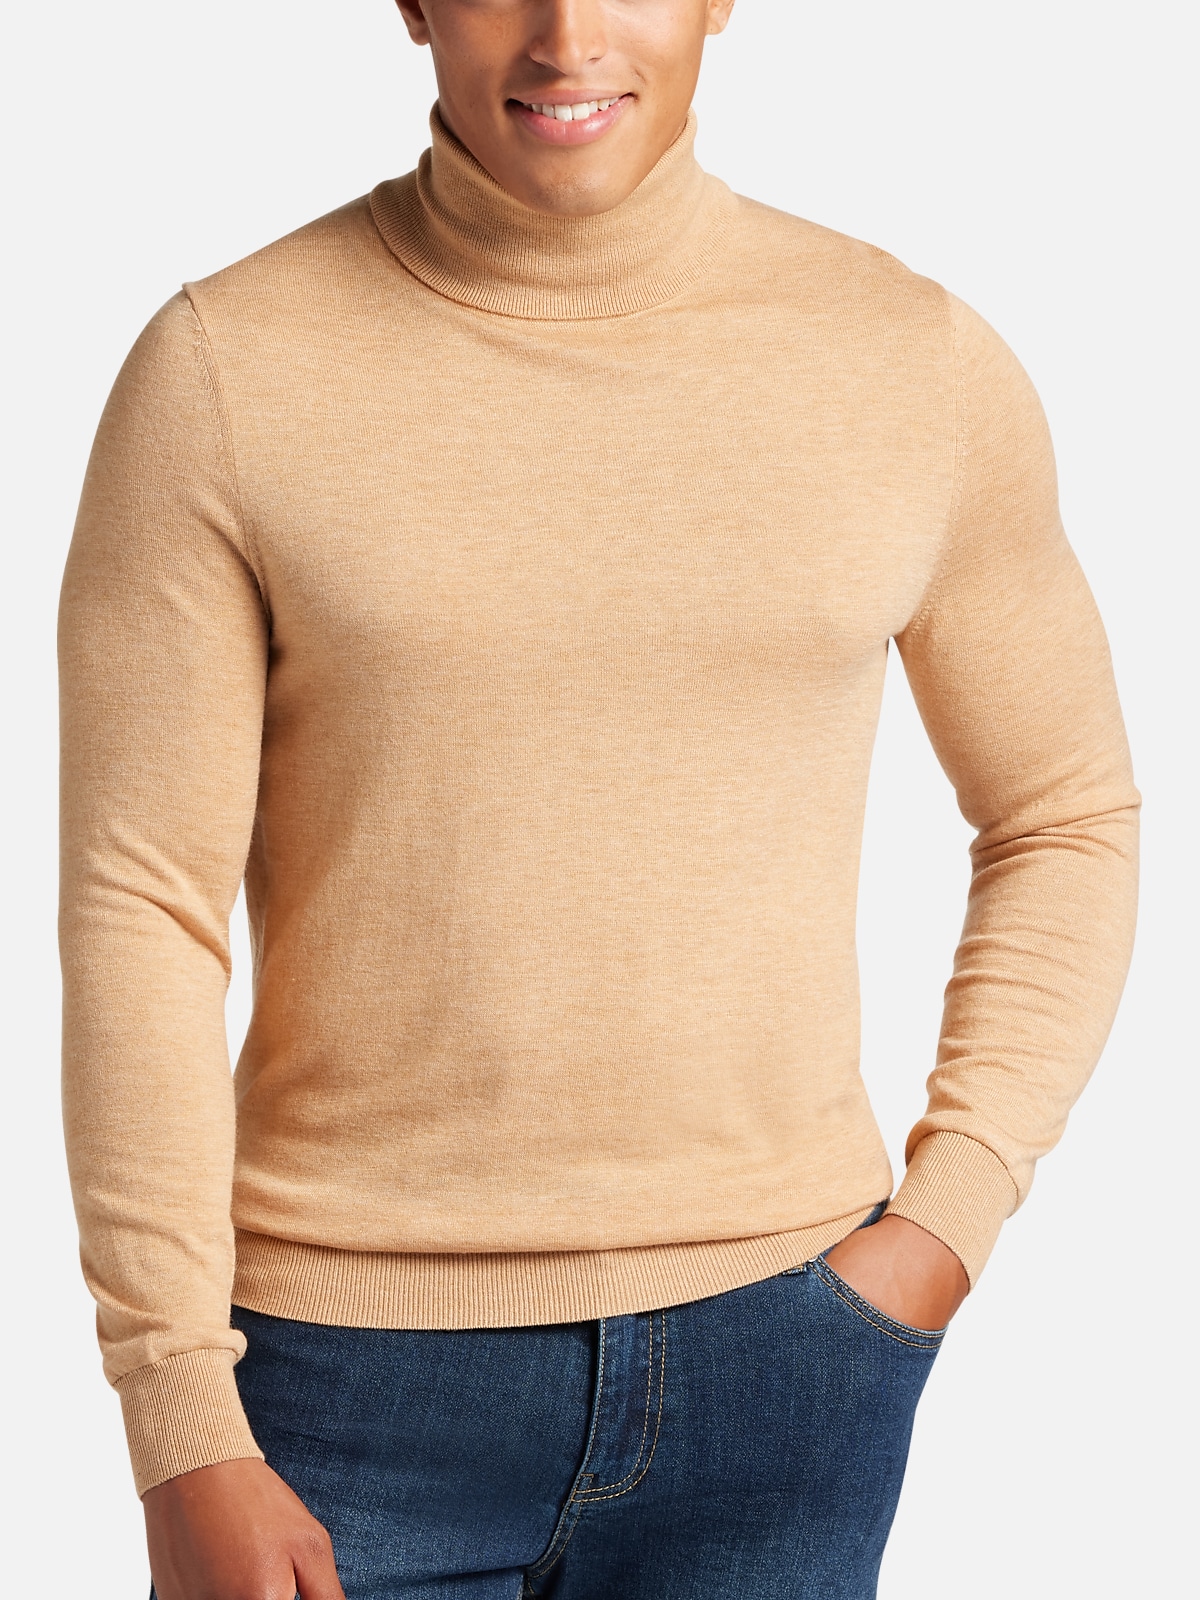 https://image.menswearhouse.com/is/image/TMW/TMW_6PDL_19_PAISLEY_GRAY_SWEATERS_TAN_MAIN?imPolicy=pdp-zoom-mob